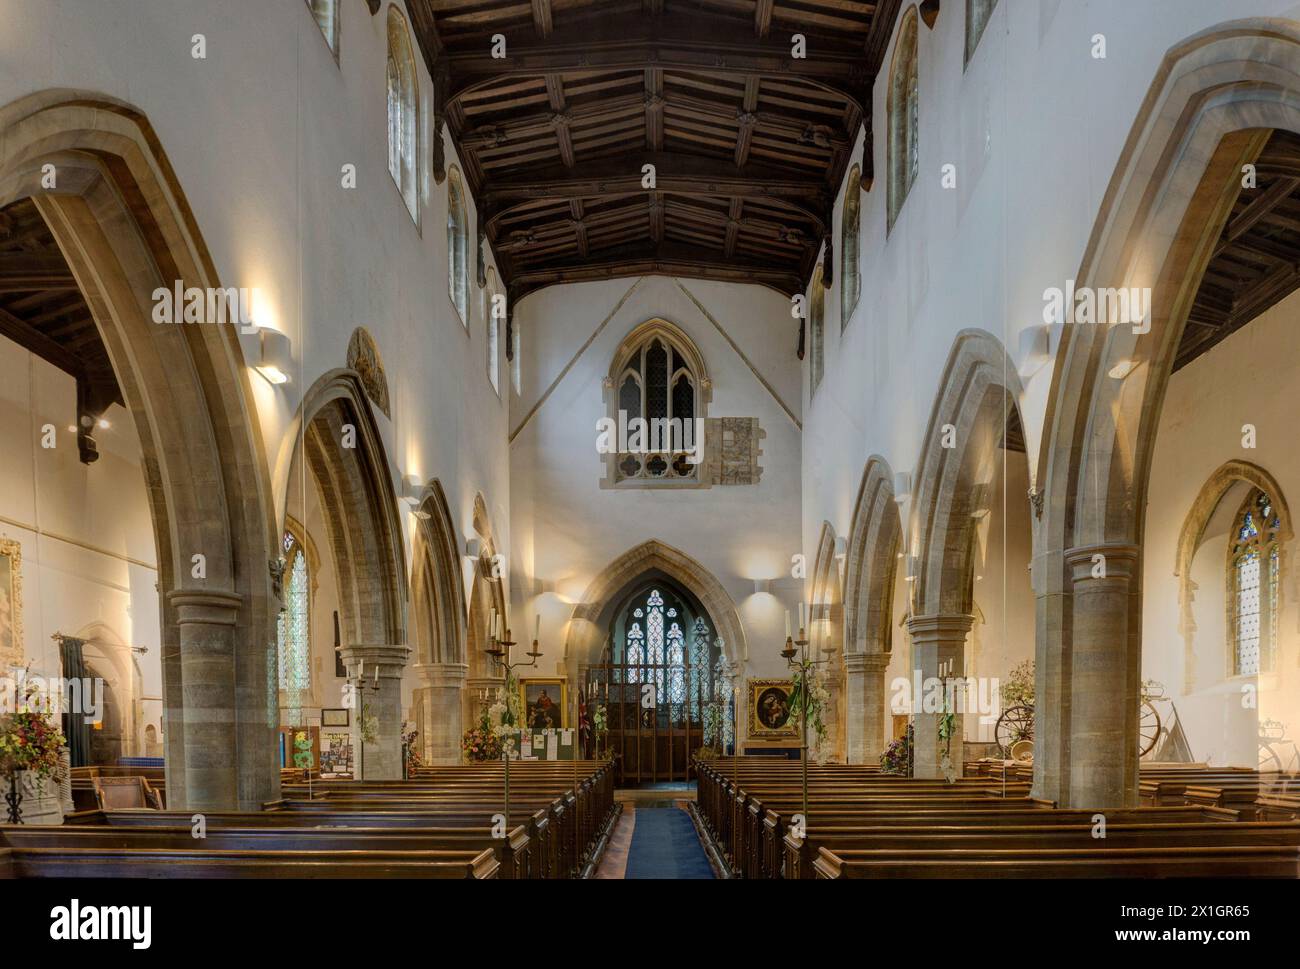 Interior of the parish church of All Saints in the village of Turvey, Bedfordshire, UK; a medieval church largely rebuilt in Victorian times. Stock Photo